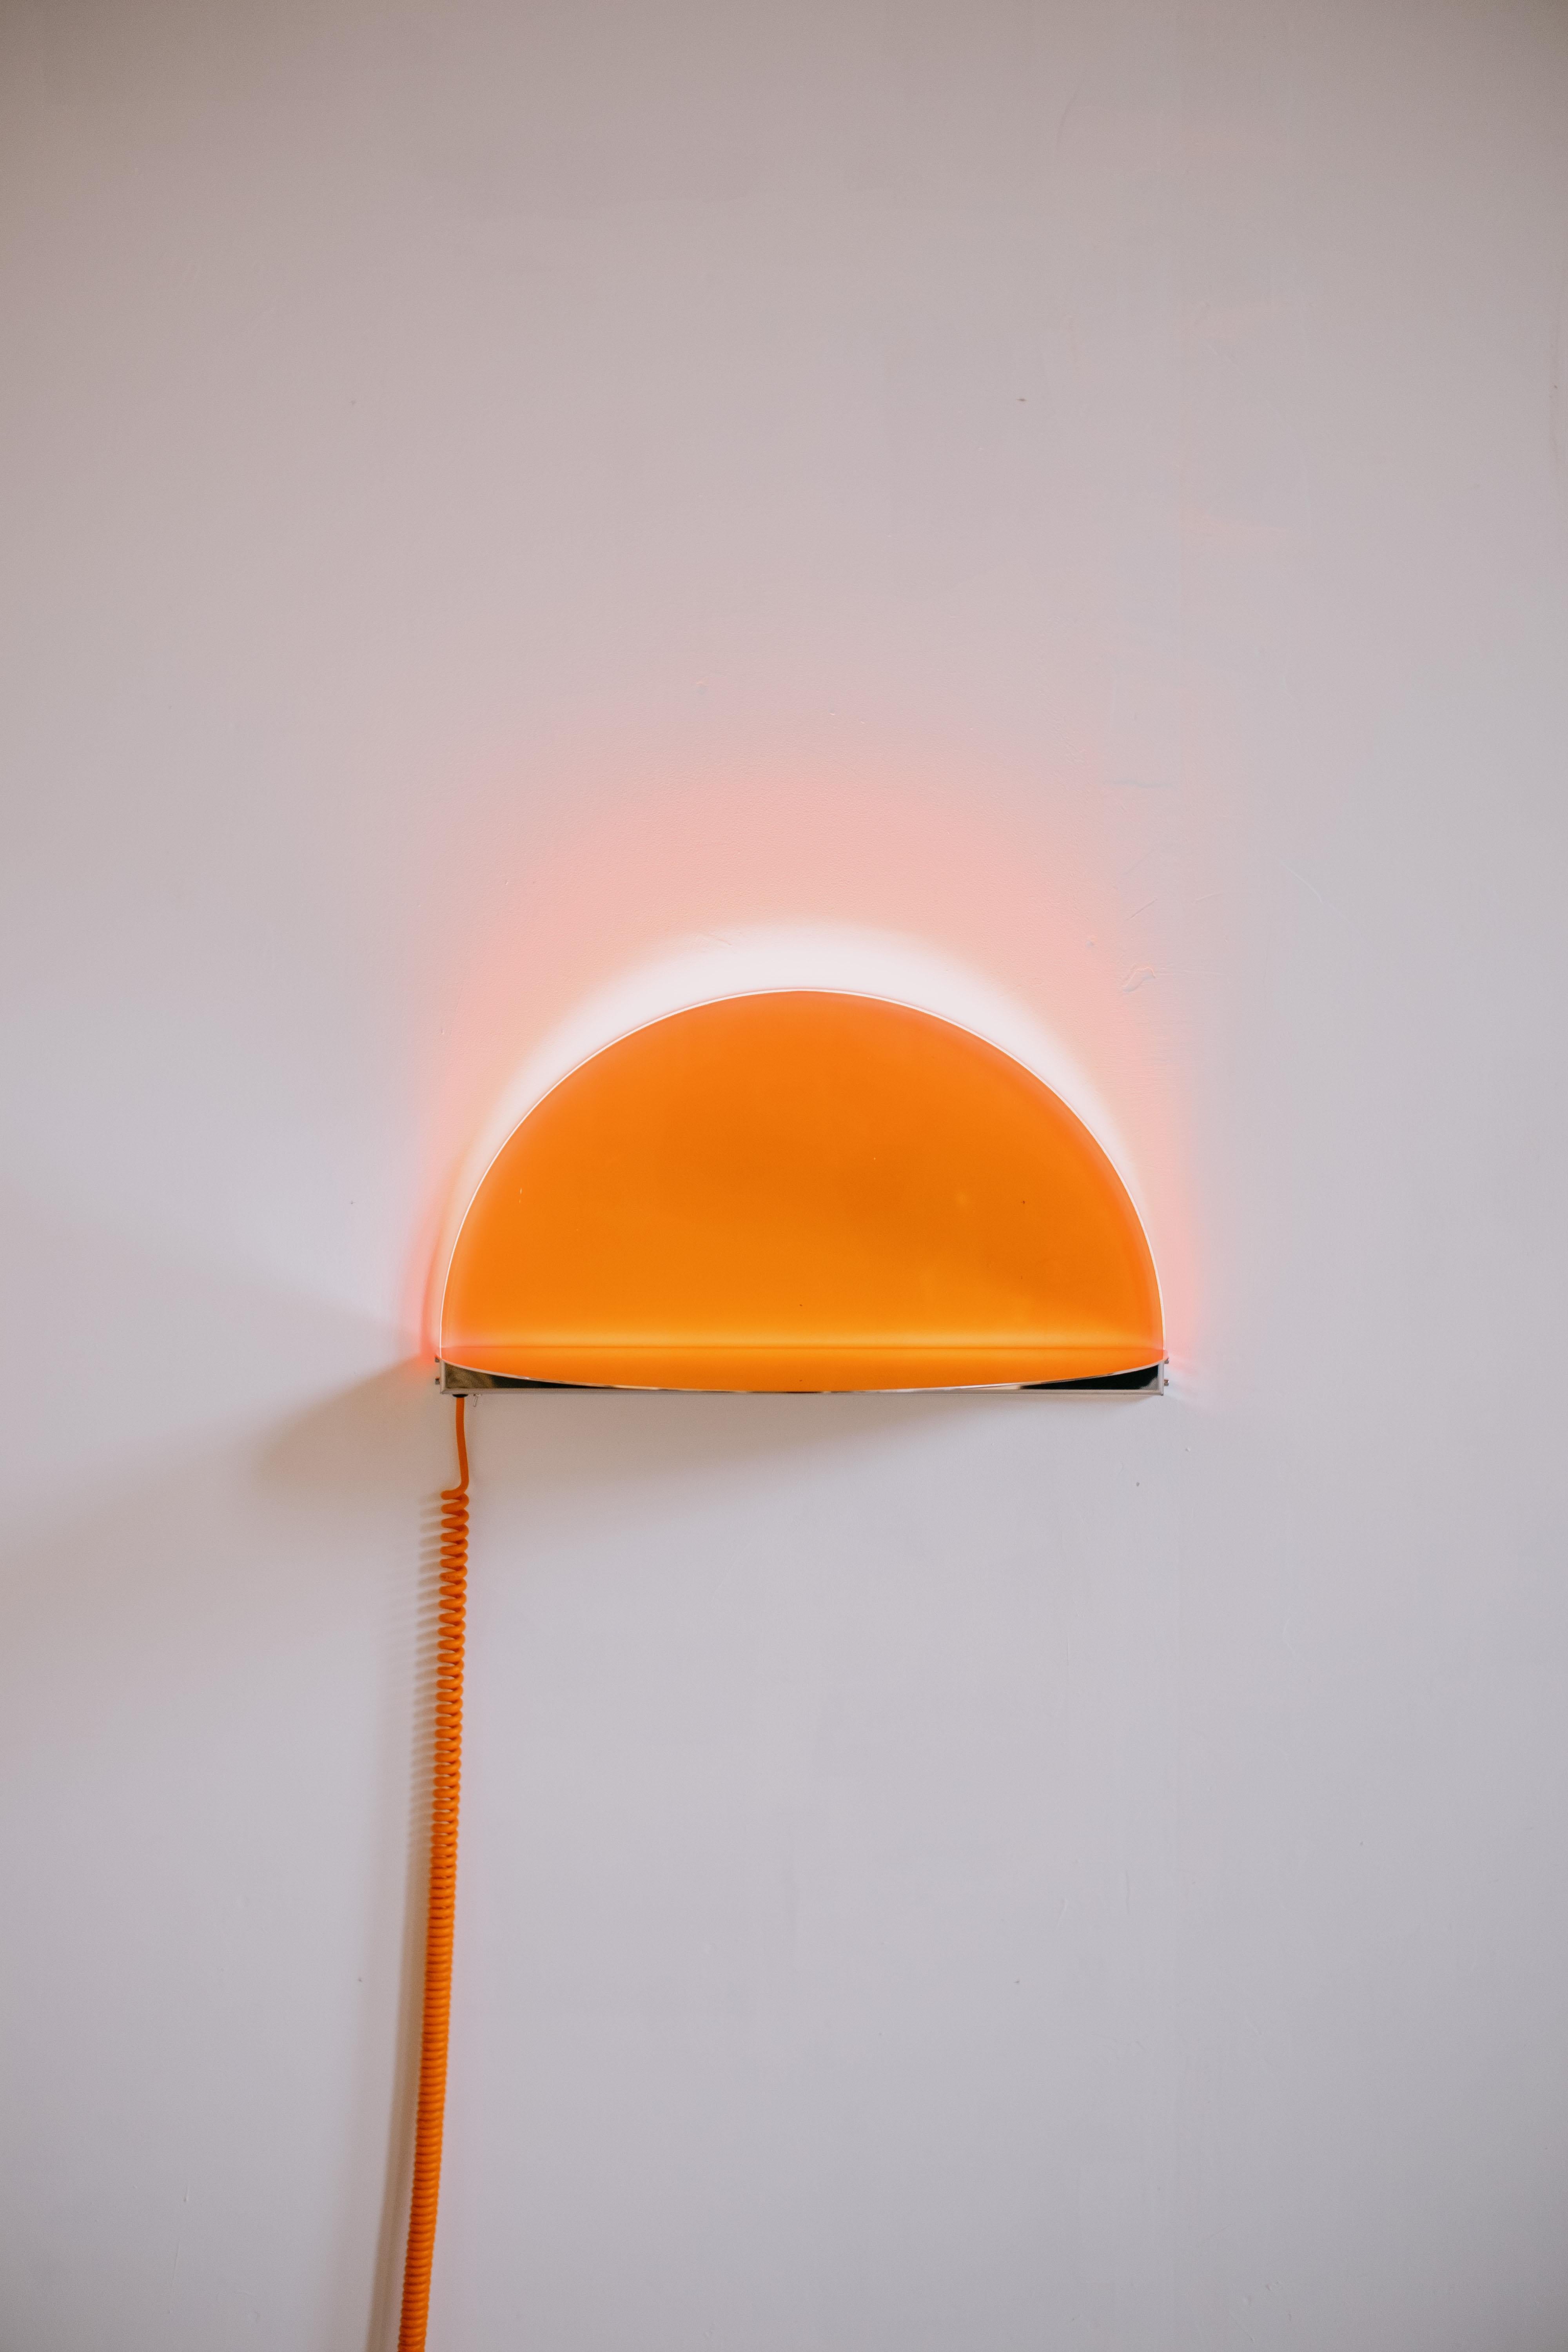 Sunset Wall Light by Amber Dewaele
Dimensions: D 62 x W 32 x H 34 cm.
Materials: Acrylic and polished stainless steel.

Sunset Wall Light
The sunset wall light is inspired by that one beautiful summer evening when the sun sets in the sea. It is